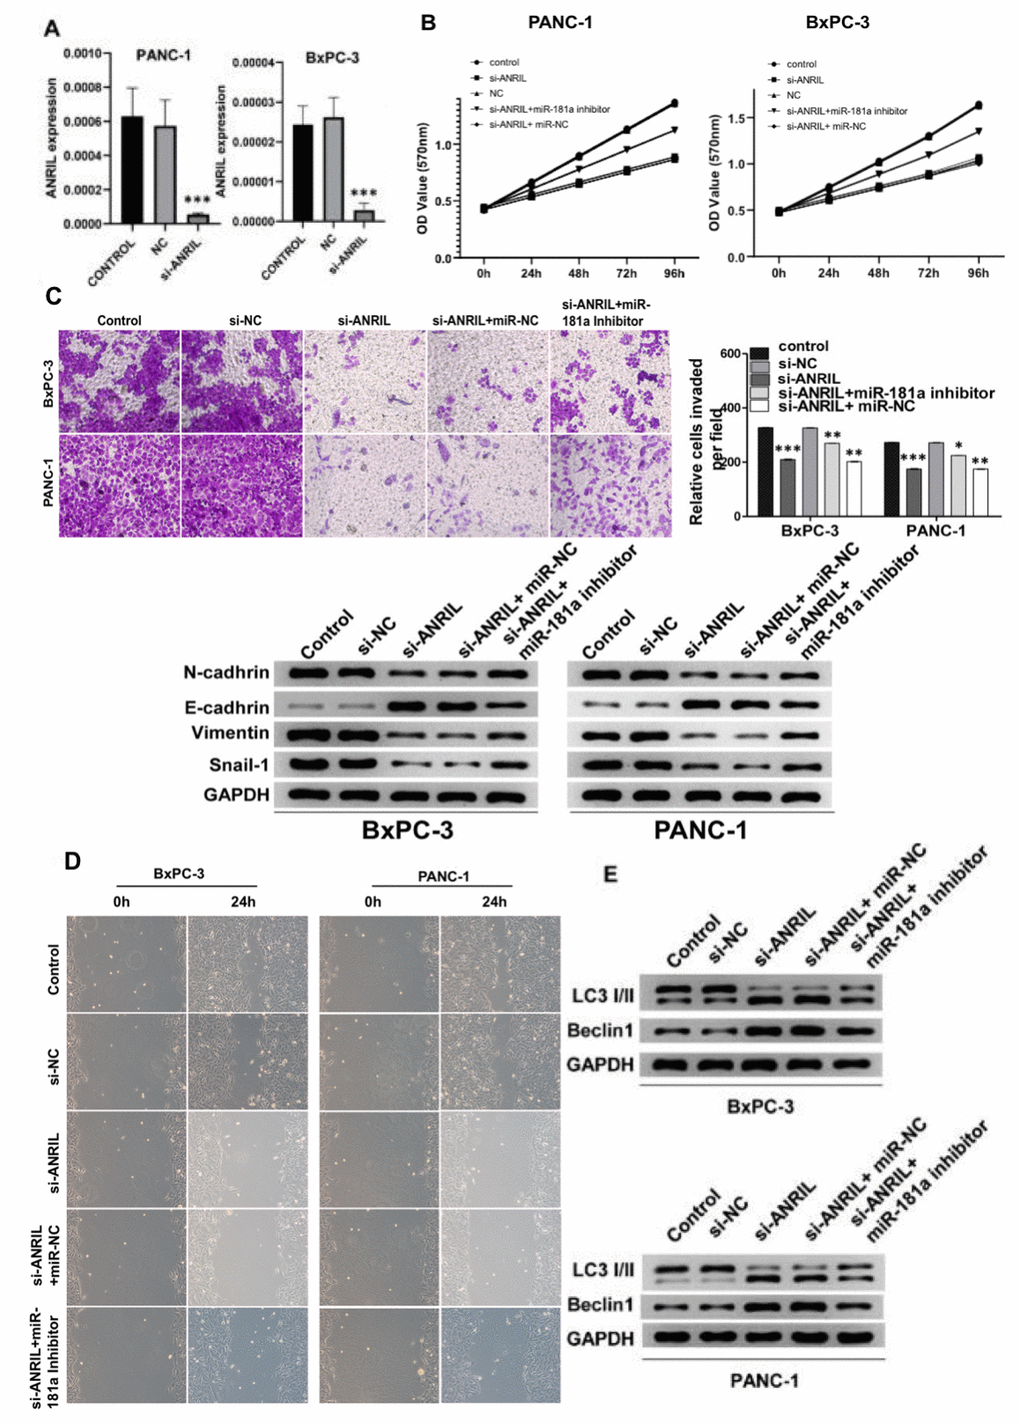 Knockdown of ANRIL inhibits the progression of pancreatic cancer. (A) Knockdown of ANRIL effectively inhibited ANRIL expression in PANC-1 cells and BxPC-3 cells. (B) MTT assay showed that the proliferation effect of pancreatic cancer cells transfected with si-ANRIL was significantly lower than that of the control group, while miR-181a inhibitor reversed the effect of si-ANRIL on pancreatic cancer cells. (C) Top: The transwell experiment reflected the effects of si-ANRIL and miR-181a inhibitor on the invasion ability of PANC-1 cells and BxPC-3 cells. Bottom: Western blot analyzed the expression levels of N-cadherin, E-cadherin, Vimentin, and Snail-1, they also represented the invasion ability of PANC-1 cells and BxPC-3 cells. (D) Scratch experiments revealed changes in healing ability of PANC-1 cells and BxPC-3 cells transfected with si-ANRIL, si-ANRIL+ miR-NC, si-ANRIL+miR-181a inhibitor, respectively. (E) The expression levels of LC3 I/II and Beclin1 reflected the regulation of autophagy levels of PANC-1 cells and BxPC-3 cells by si-ANRIL and miR-181a inhibitor. Standardized data with GAPDH. *P **P ***P 